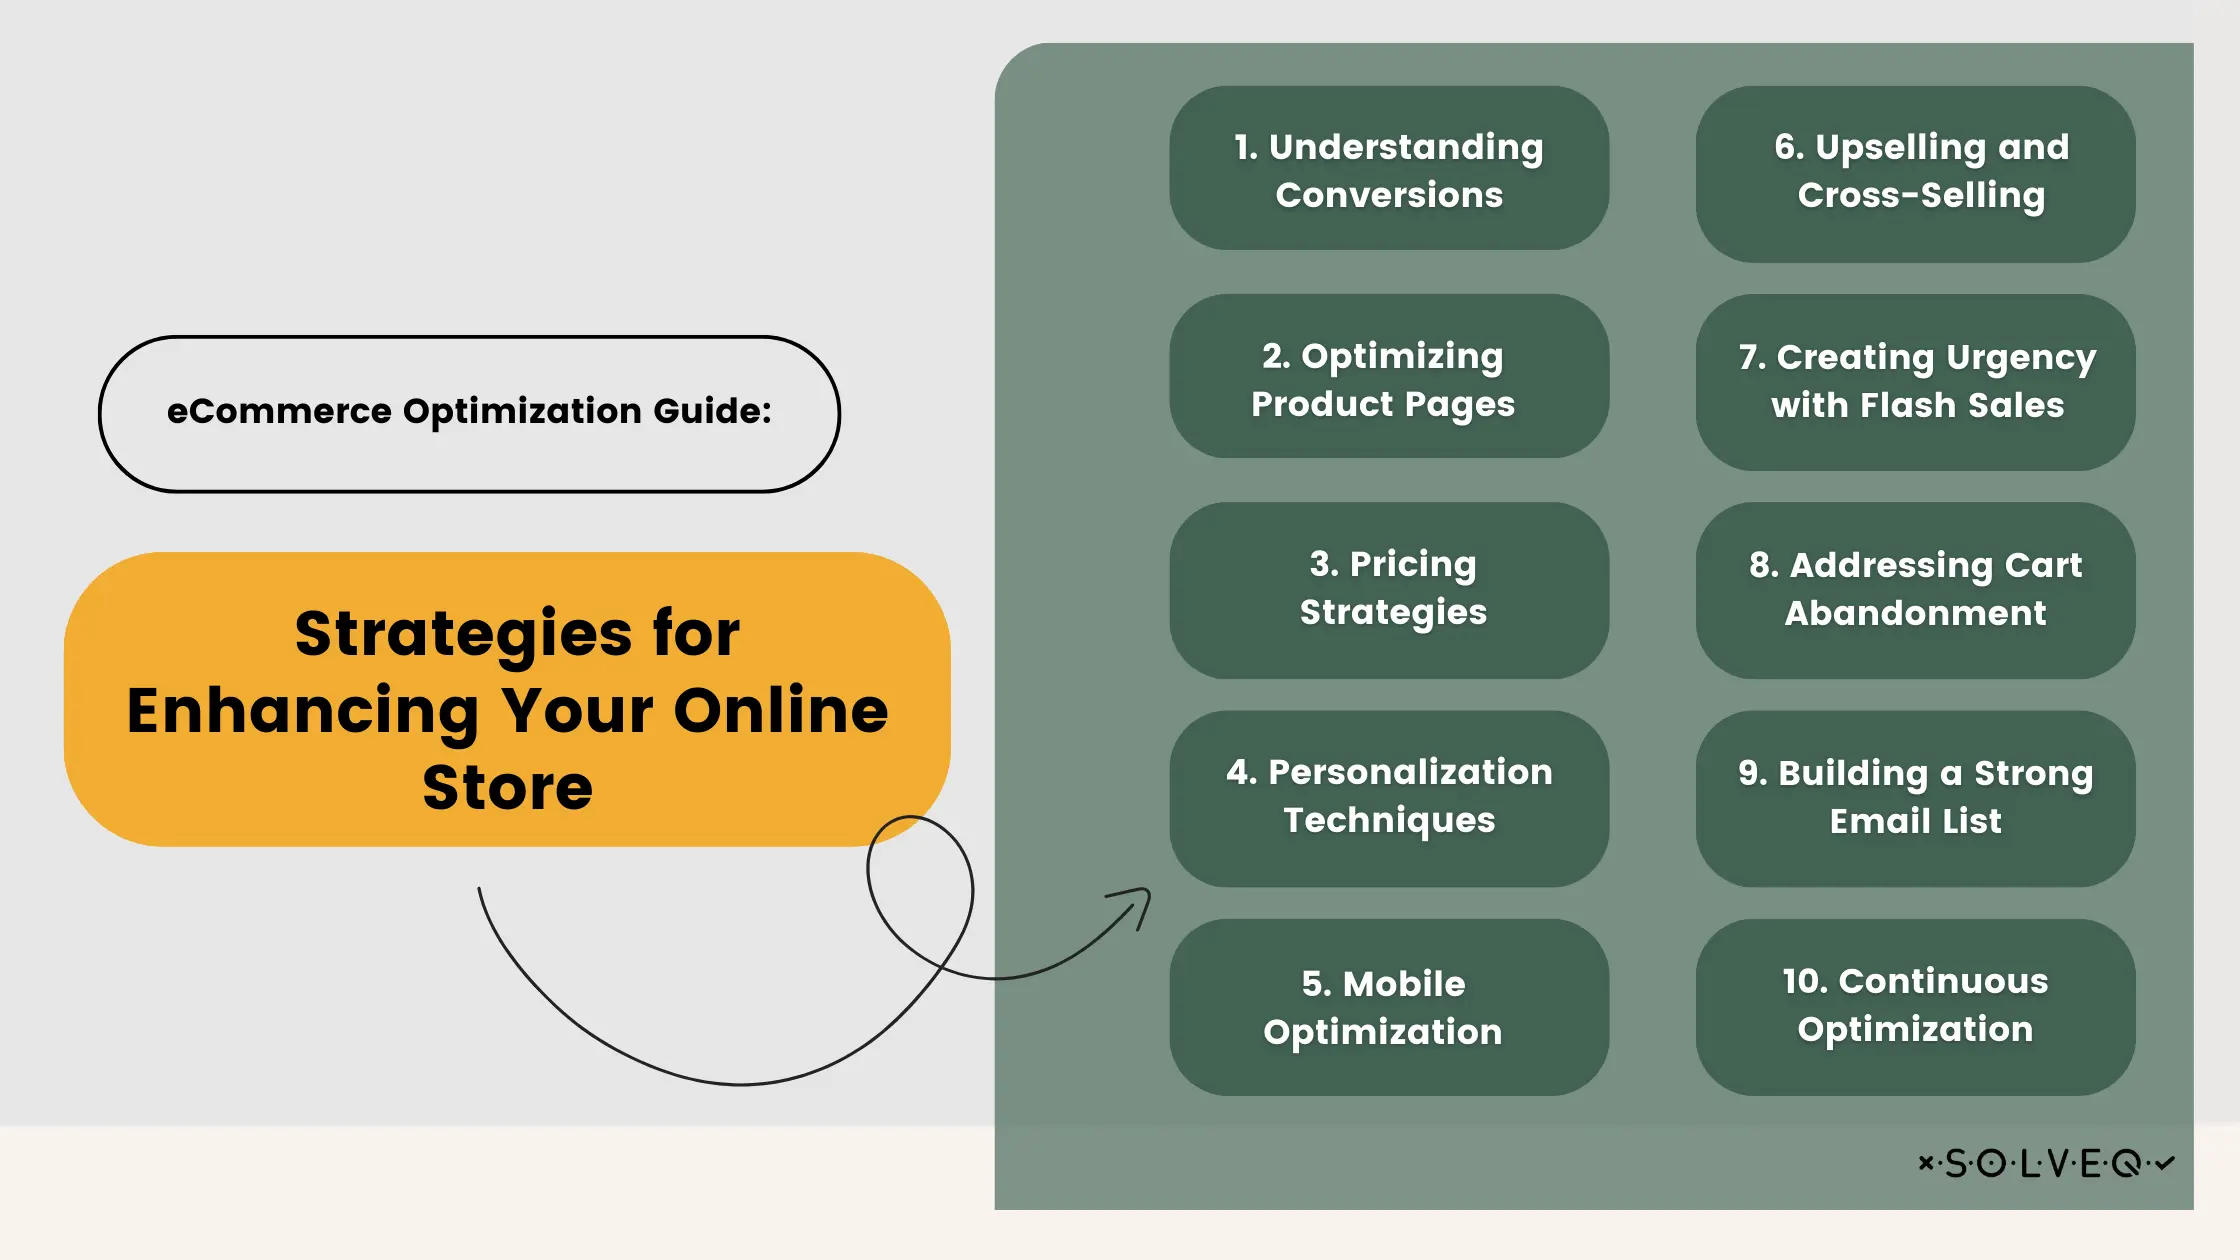 eCommerce Optimization Guide: Strategies for Enhancing Your Online Store